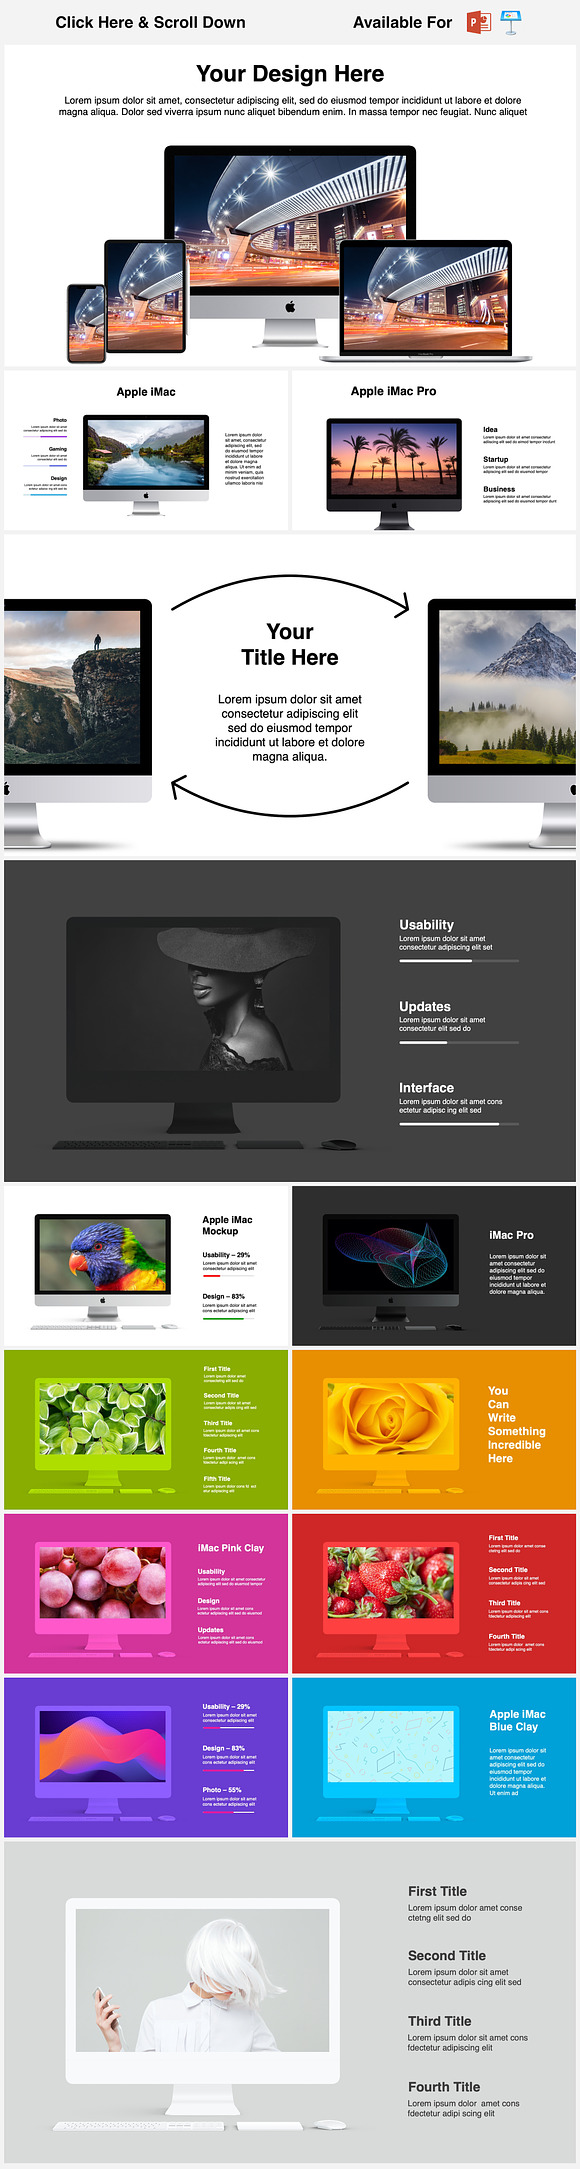 Animated Mockups Presentation Bundle in Keynote Templates - product preview 4